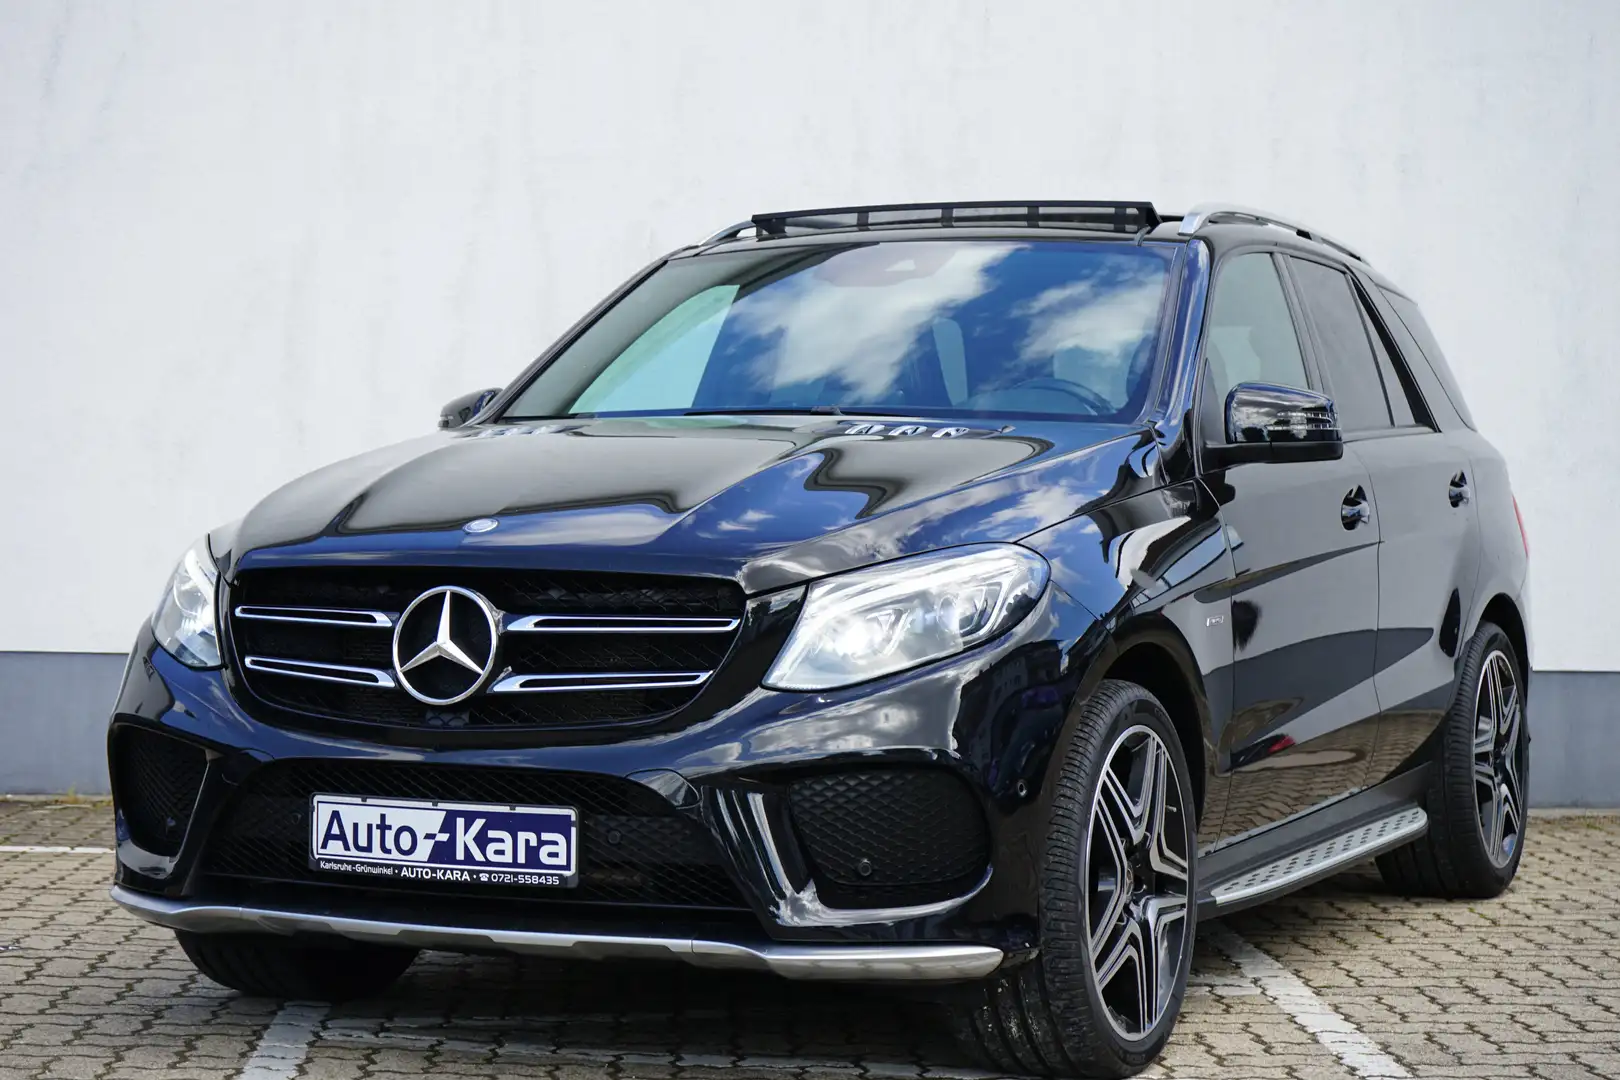 Mercedes-Benz GLE 450 4MATIC*21 Zoll*Panorama*LED ILS*Standheizung*Voll Schwarz - 1